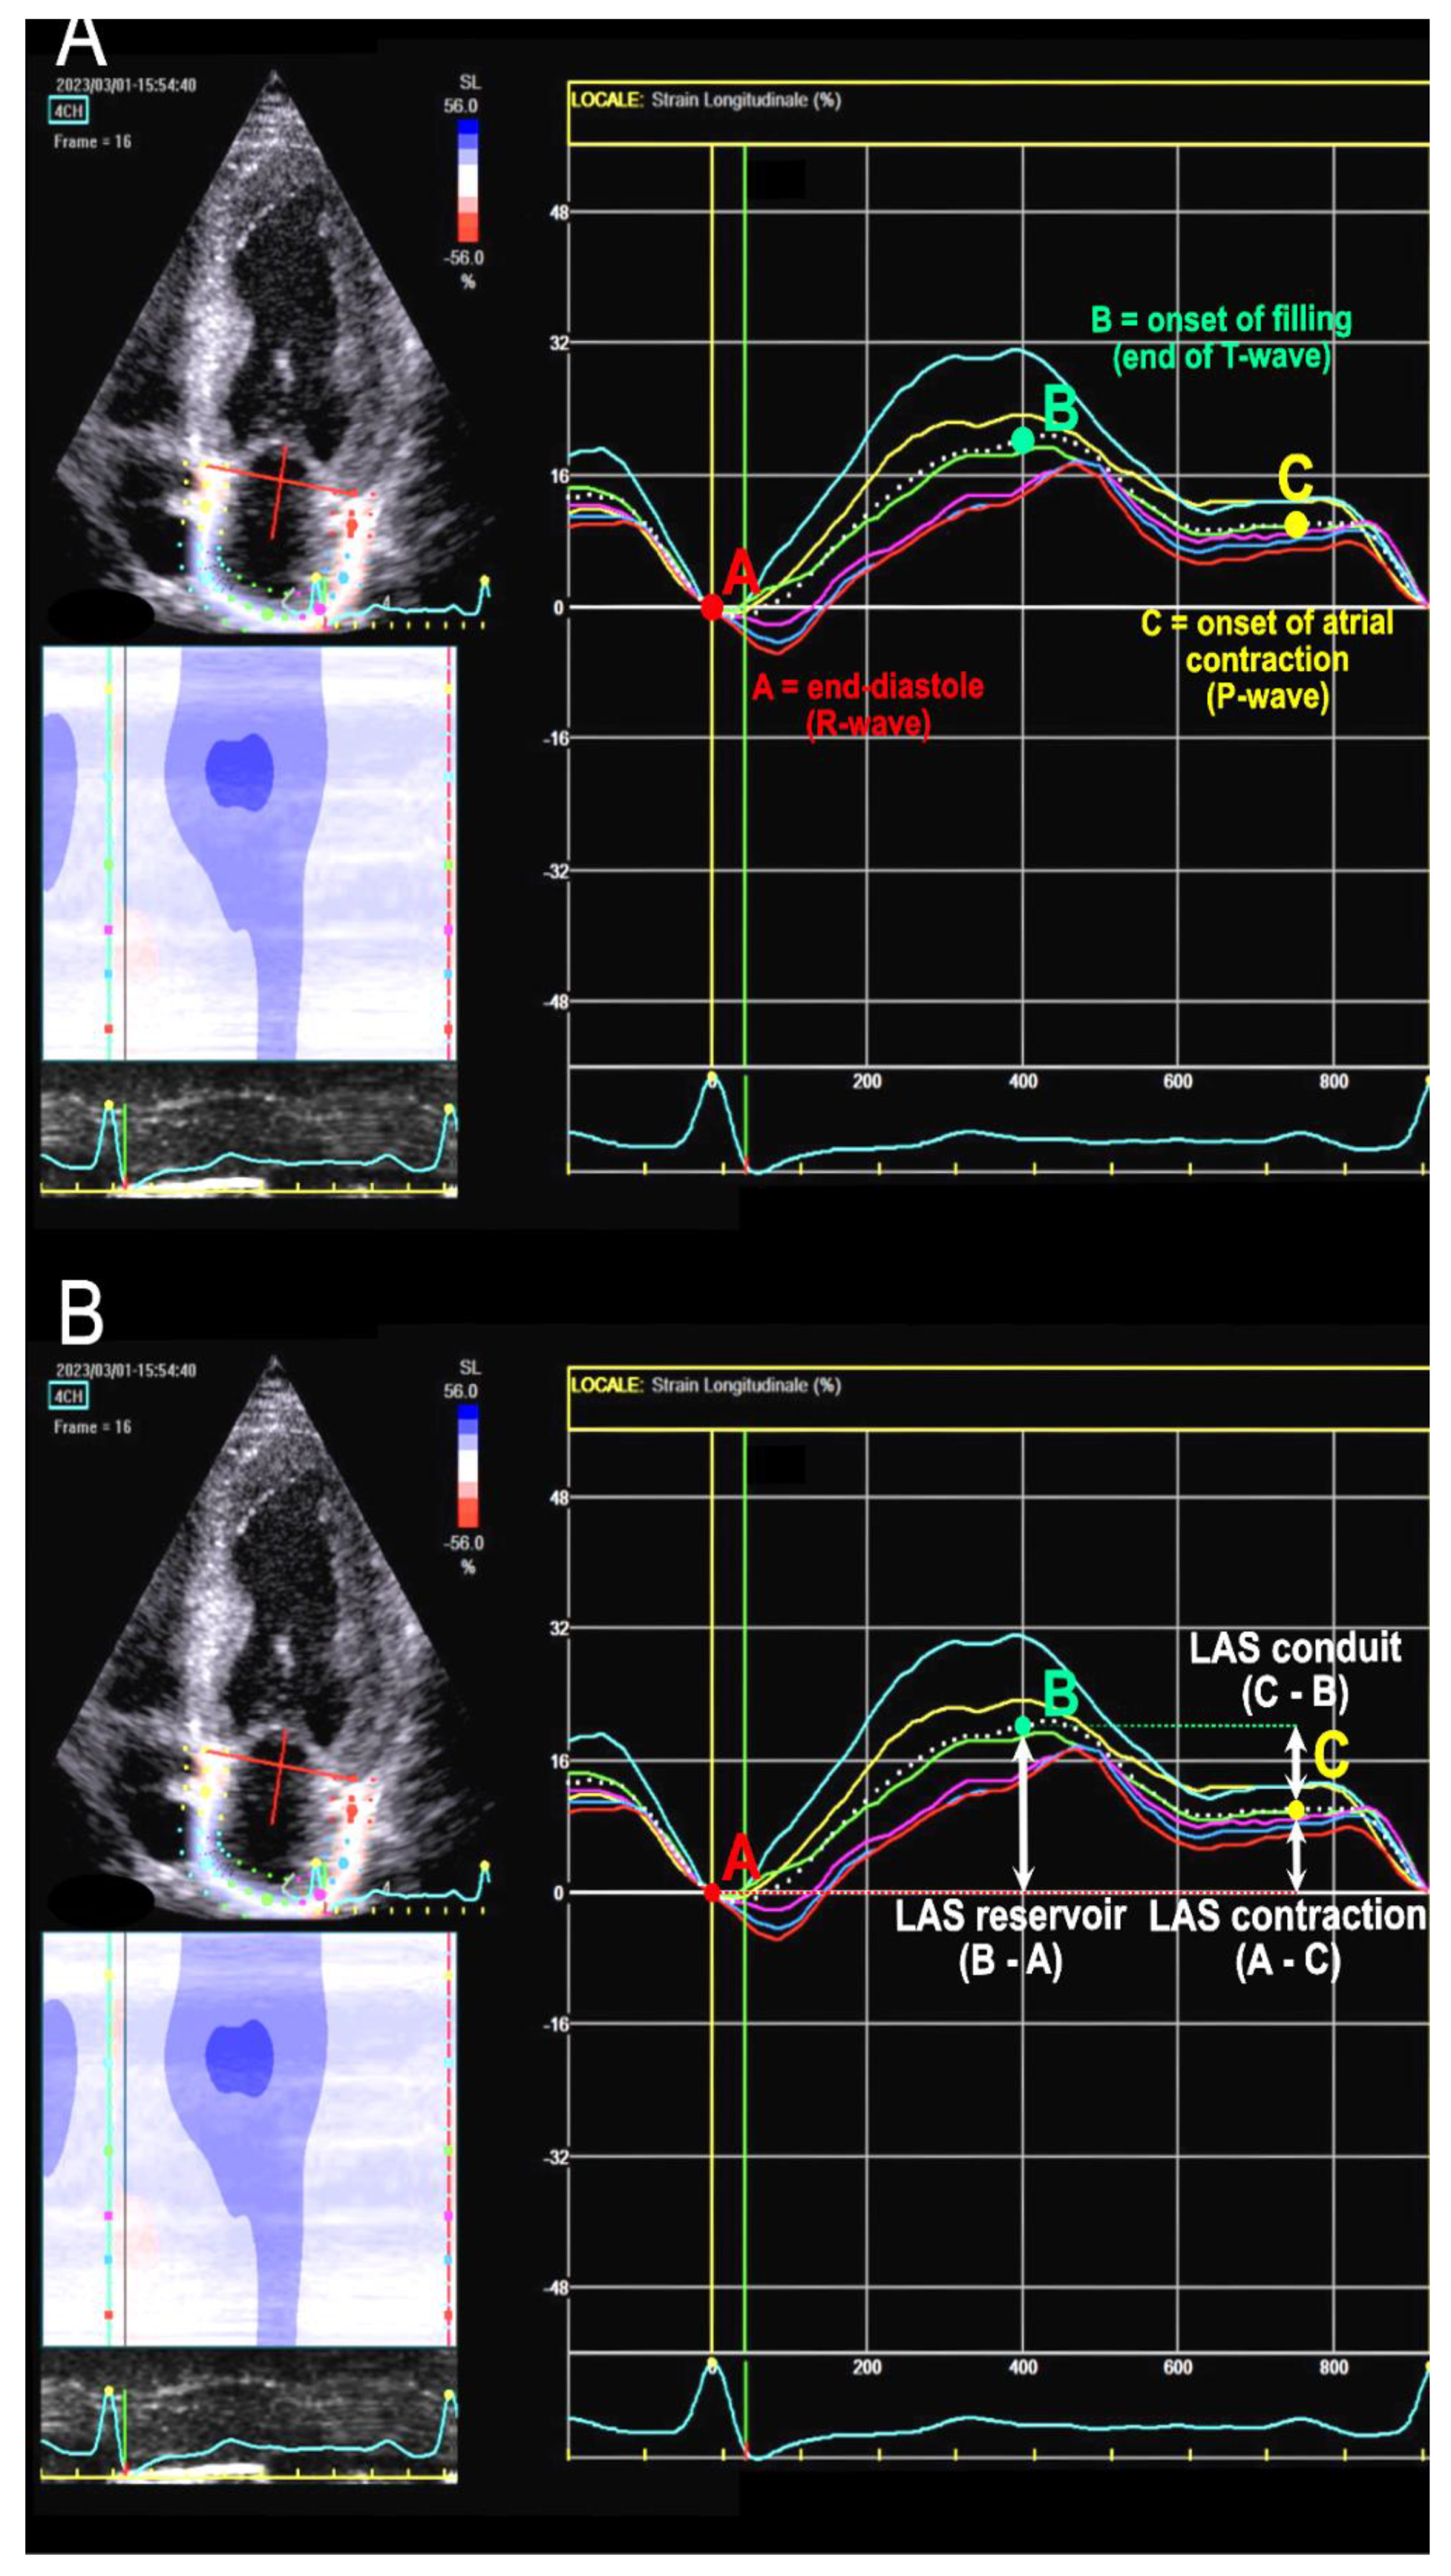 Progression of Left Ventricular Myocardial Dysfunction in Systemic  Sclerosis: A Speckle-tracking Strain Echocardiography Study